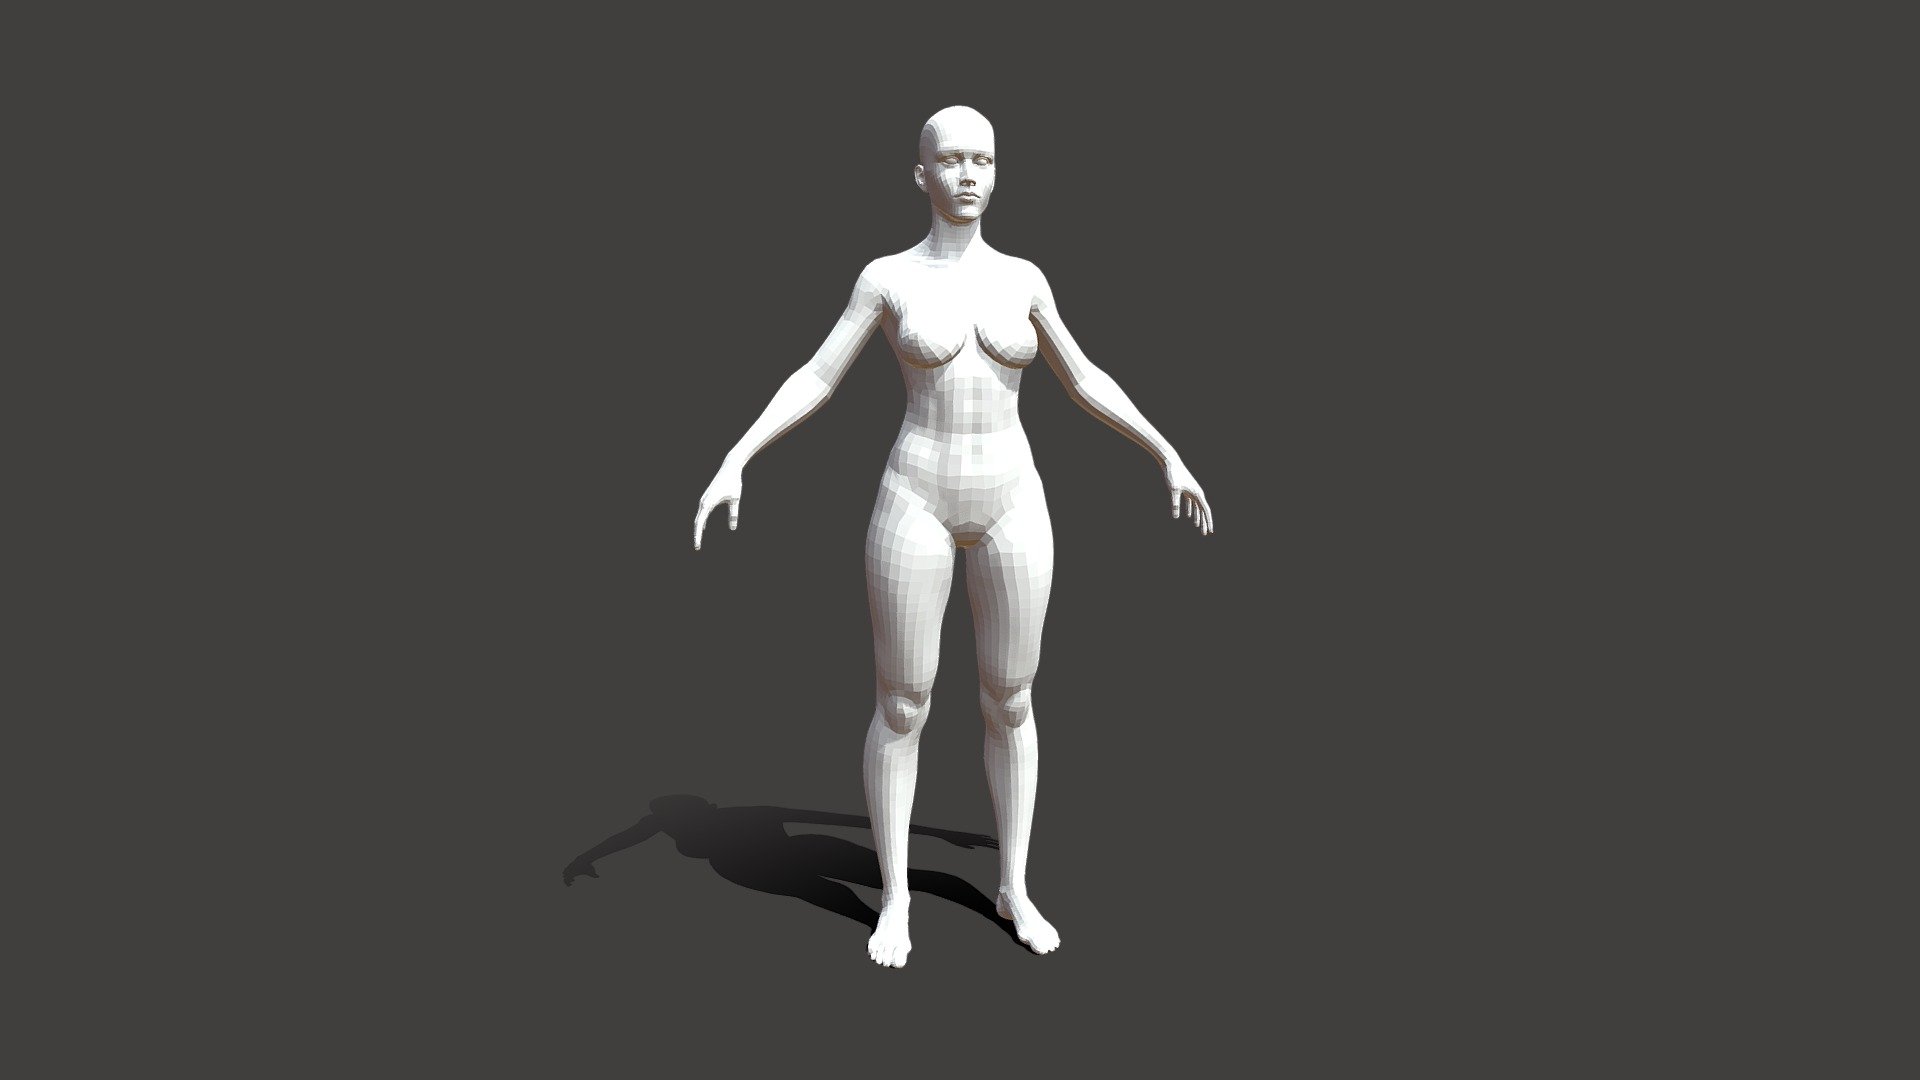 Female Anatomy Basemeshes

It can be used as basemesh or as an reference for your sculpt projects

There are High Poly FBX and OBJ files with high-poly, and Low Poly FBX file with rigged low-poly for subdivisions and blend file




Blender file (.blend format for Blender)

Very high-poly mesh (19 000 000 polygons)

High-poly decimated mesh (6 000 000 polygons)

Rigged low-poly mesh for subdivisions (20 000 polygons) [also it can used as a game ready low poly model]

How to use rigged masemesh, in my youtube chanel: https://youtu.be/l29Uqabok0I?si=qJPAisYBnECZ7_o3

All the best : ) - Female Basemeshes, low & high poly, rigged - Buy Royalty Free 3D model by SakoSculpt 3d model